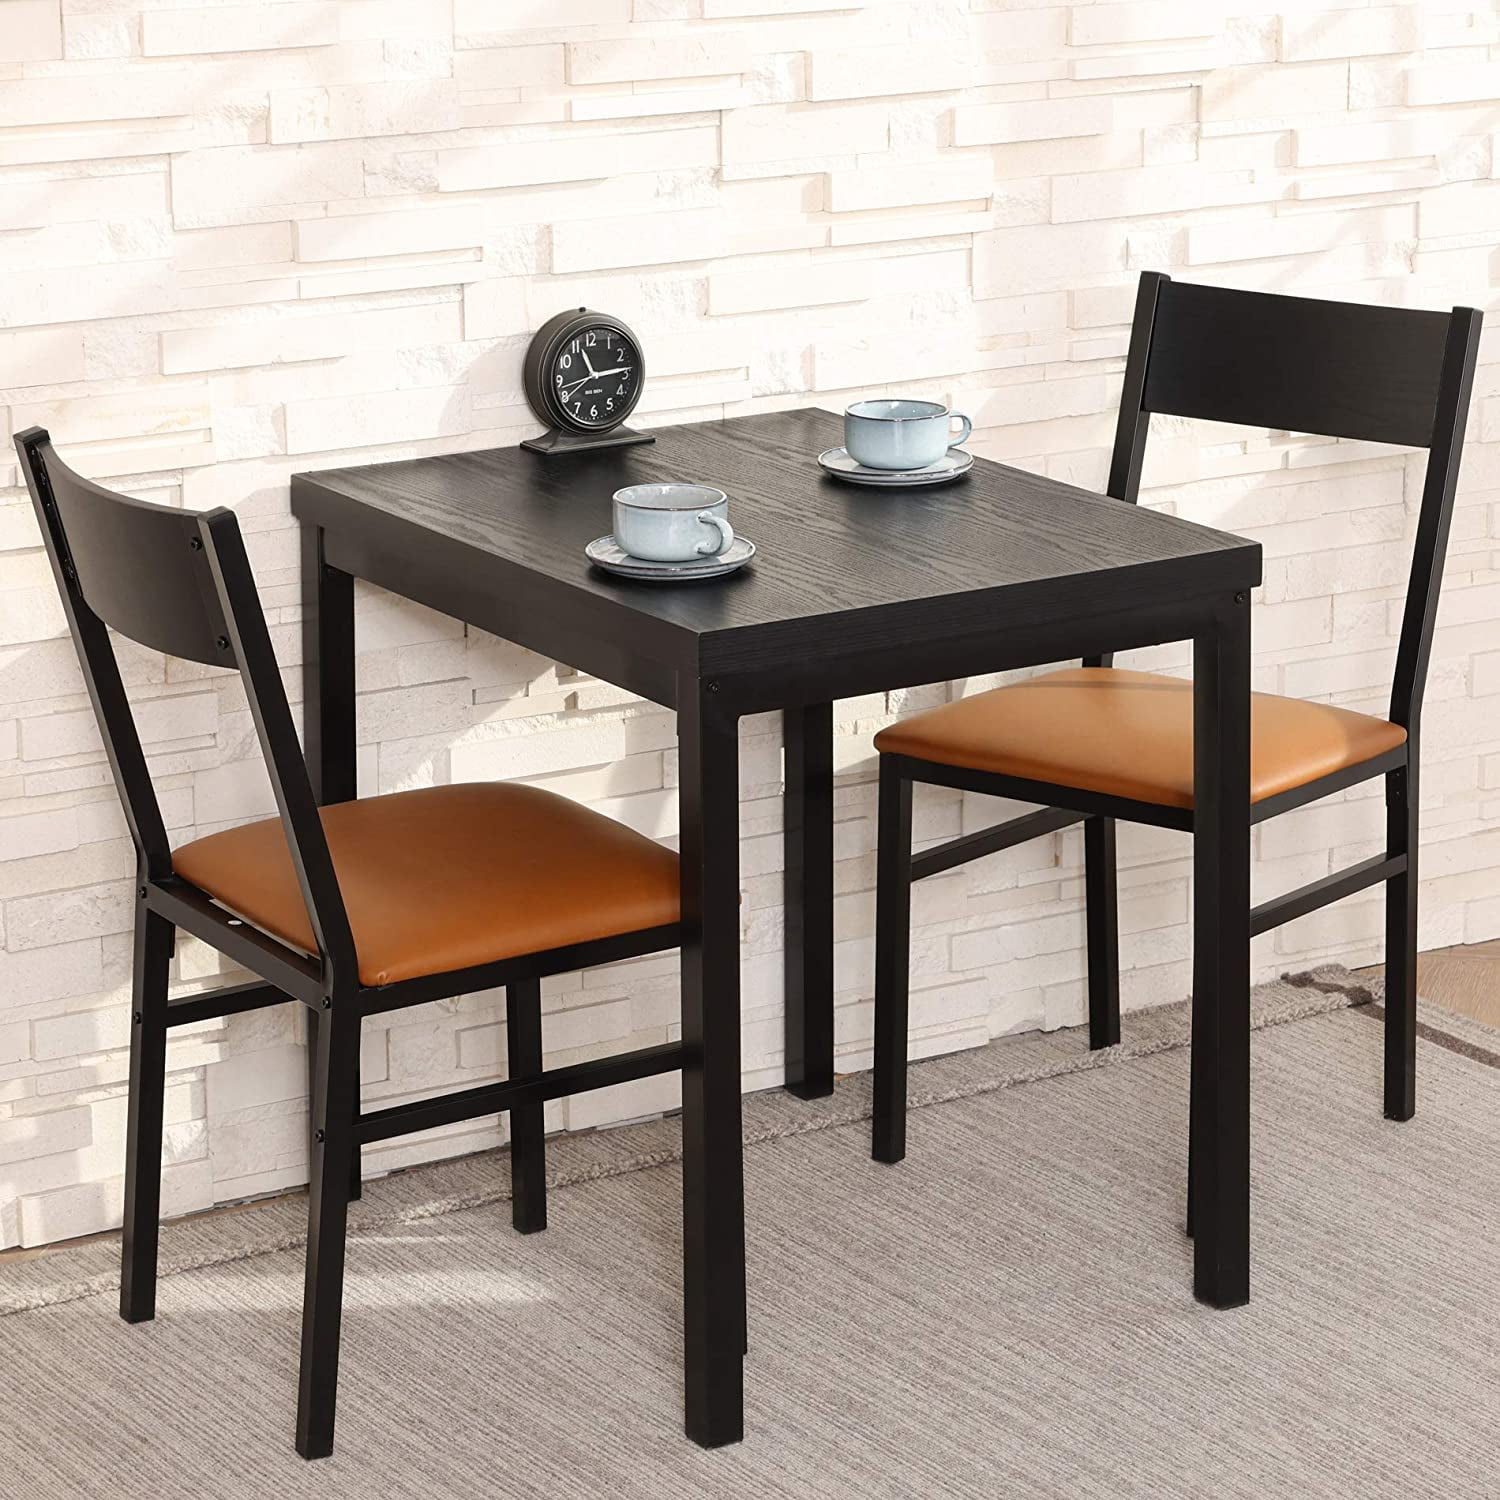 FITUEYES 3 Piece Dining Table Set of 2 with Cushioned Chairs, Black and